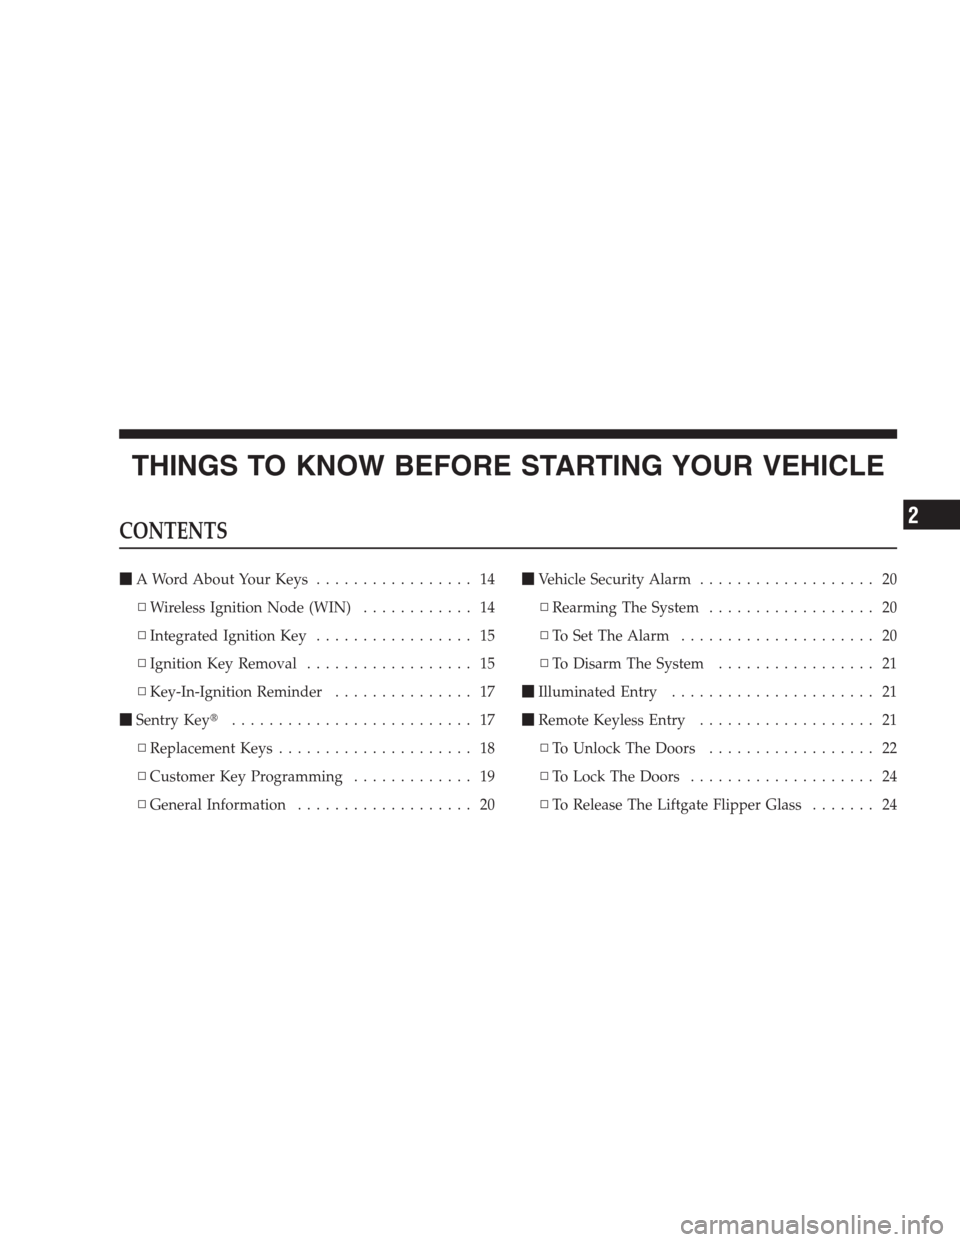 JEEP GRAND CHEROKEE 2009 WK / 3.G User Guide THINGS TO KNOW BEFORE STARTING YOUR VEHICLE
CONTENTS
A Word About Your Keys................. 14
▫Wireless Ignition Node (WIN)............ 14
▫Integrated Ignition Key................. 15
▫Igniti